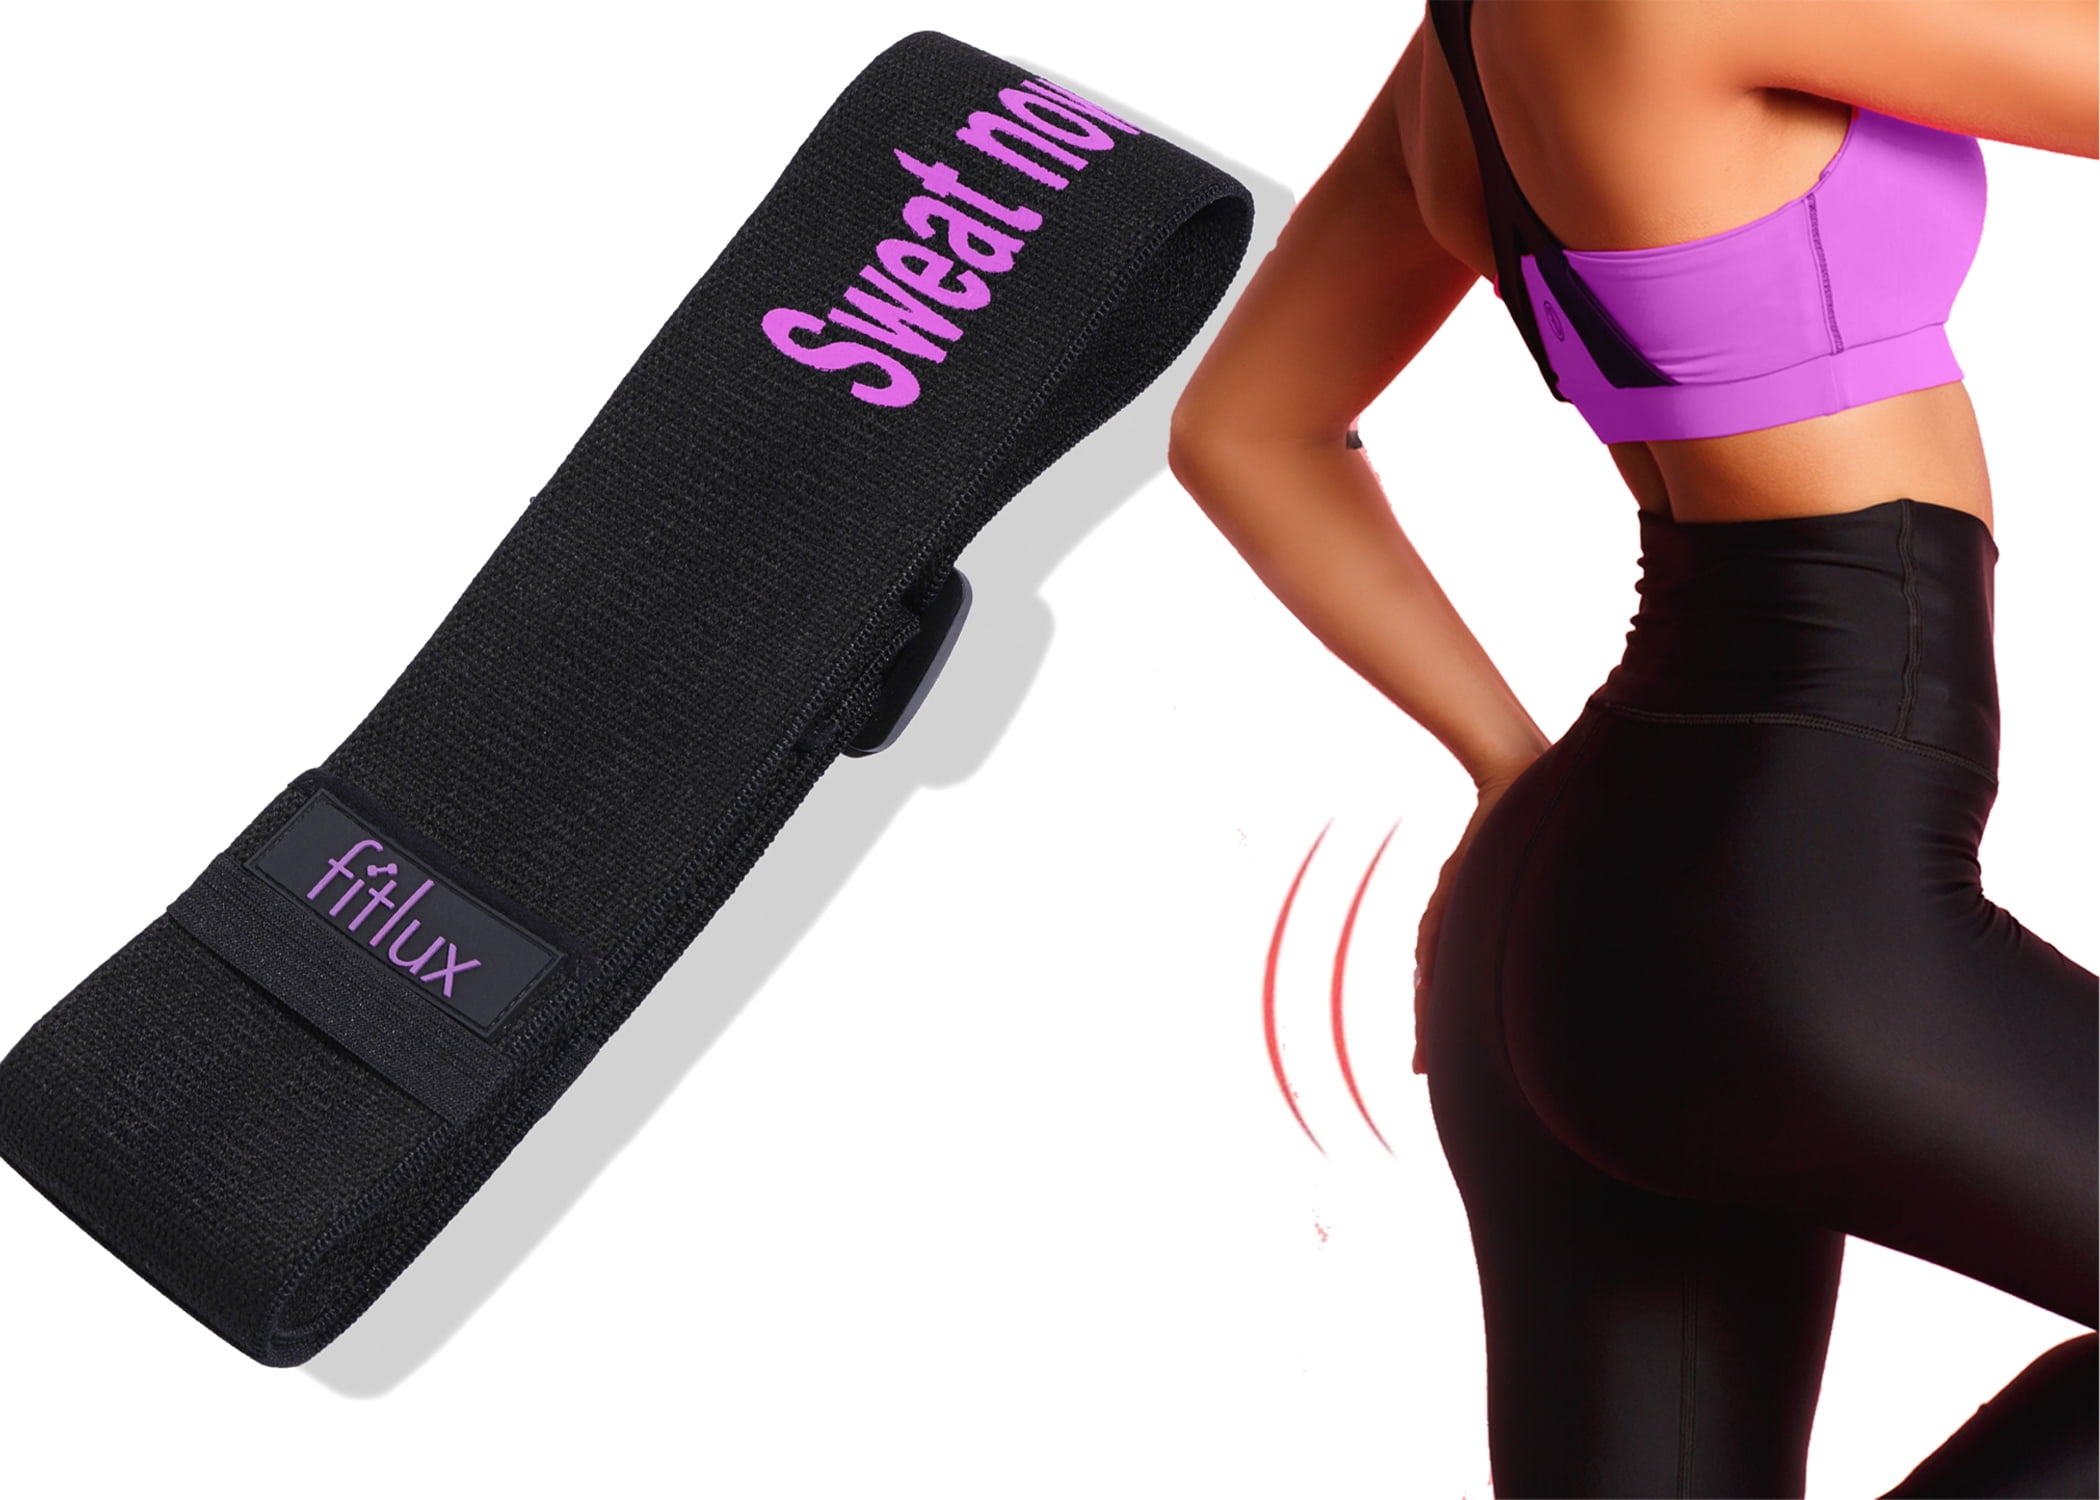 SUPER DRIVE Yoga Resistance Booty Bands for Full Body Bands Strength Belt 